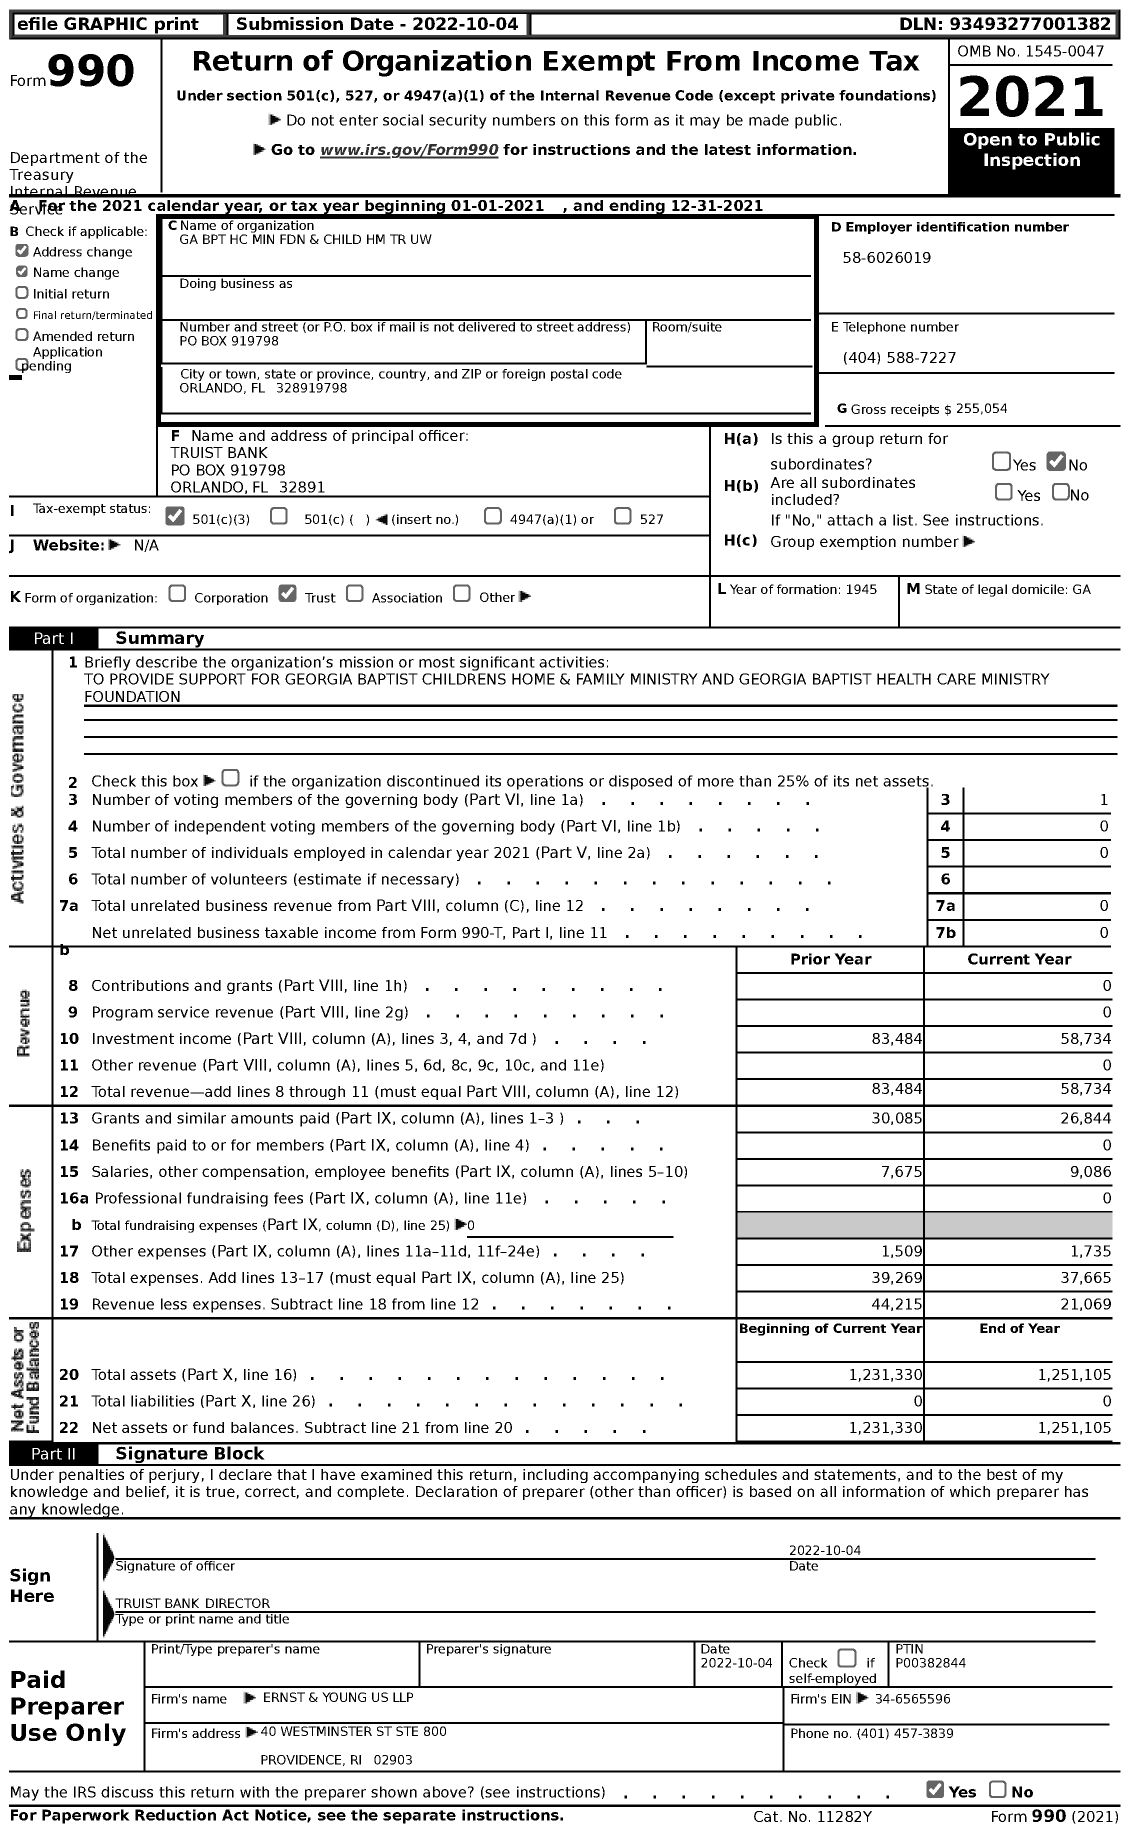 Image of first page of 2021 Form 990 for Ga BPT HC Min Foundation and Child HM TR Uw